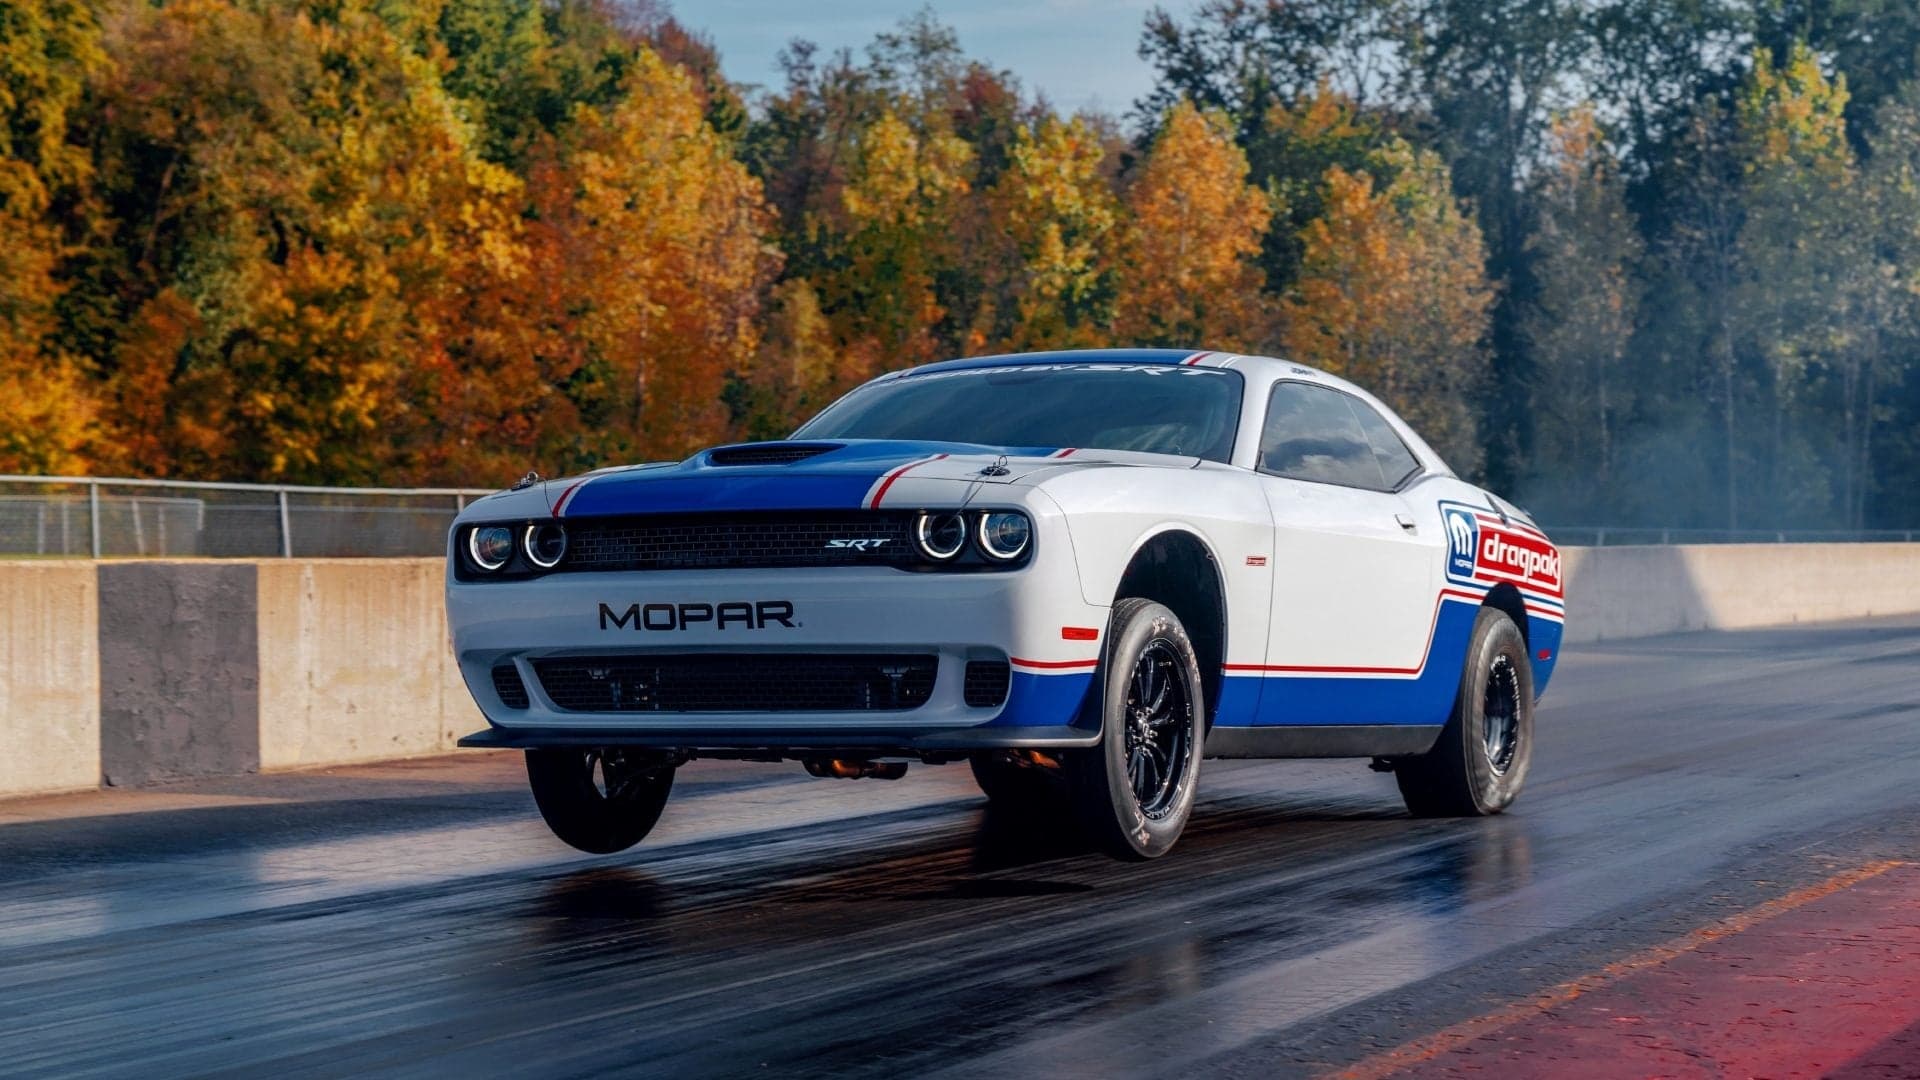 2020 Dodge Challenger Drag Pak Can Run 7s, Is Limited to Only 50 Units